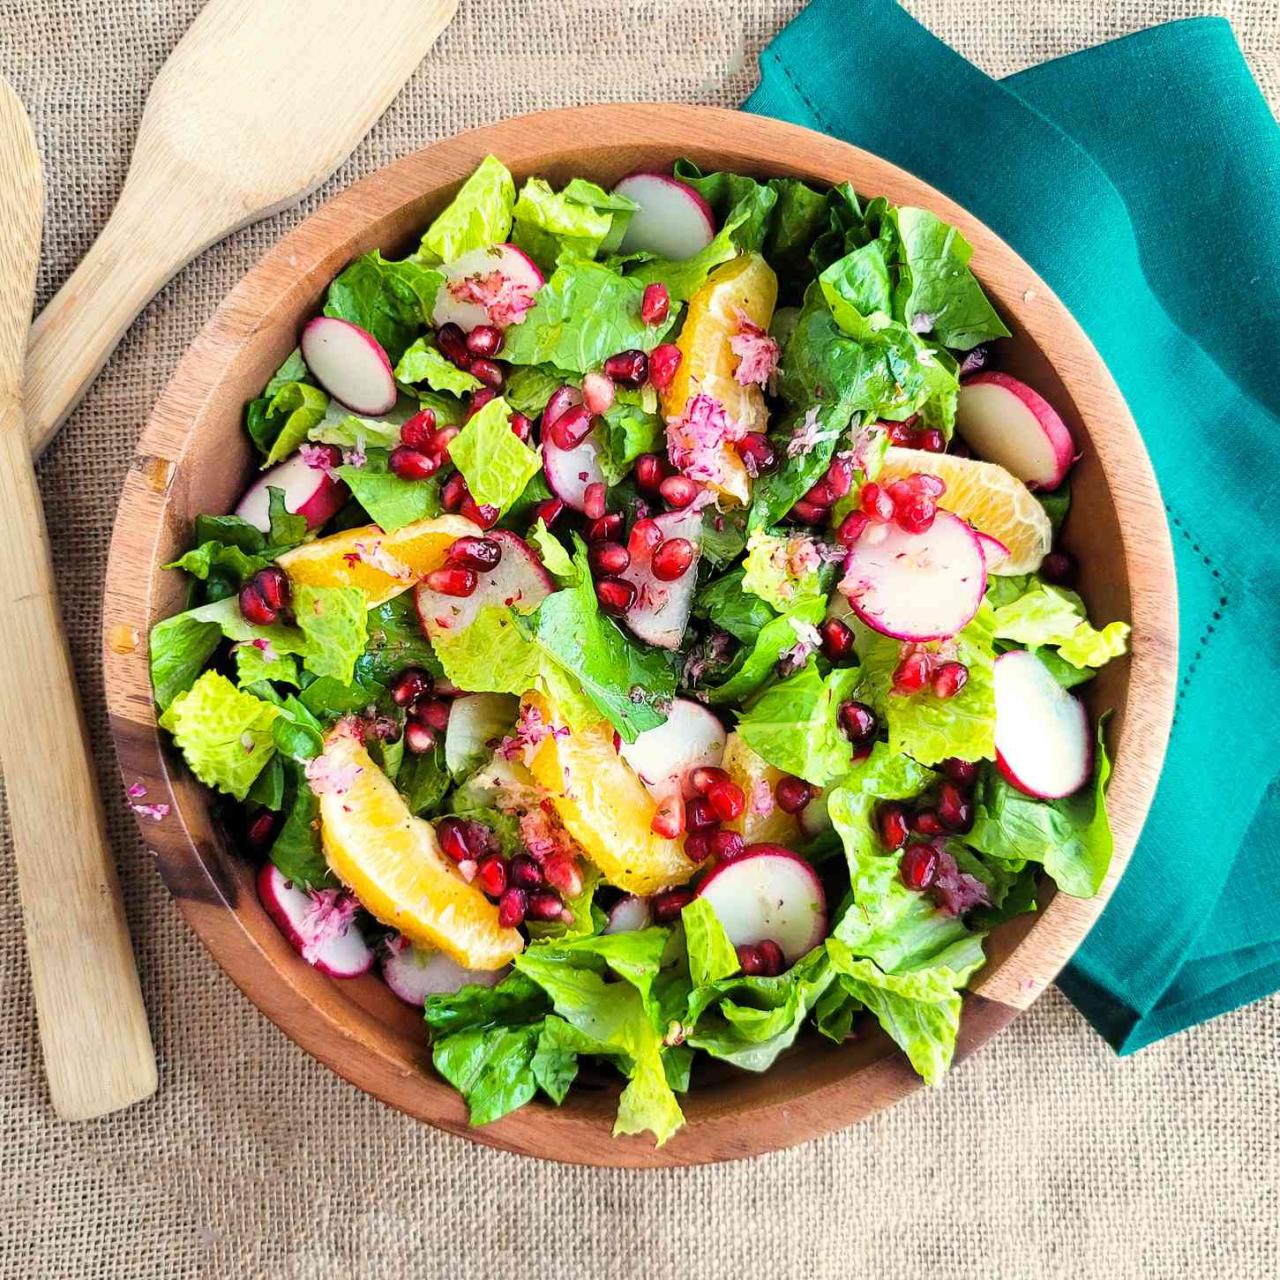 places to have good healthy salads